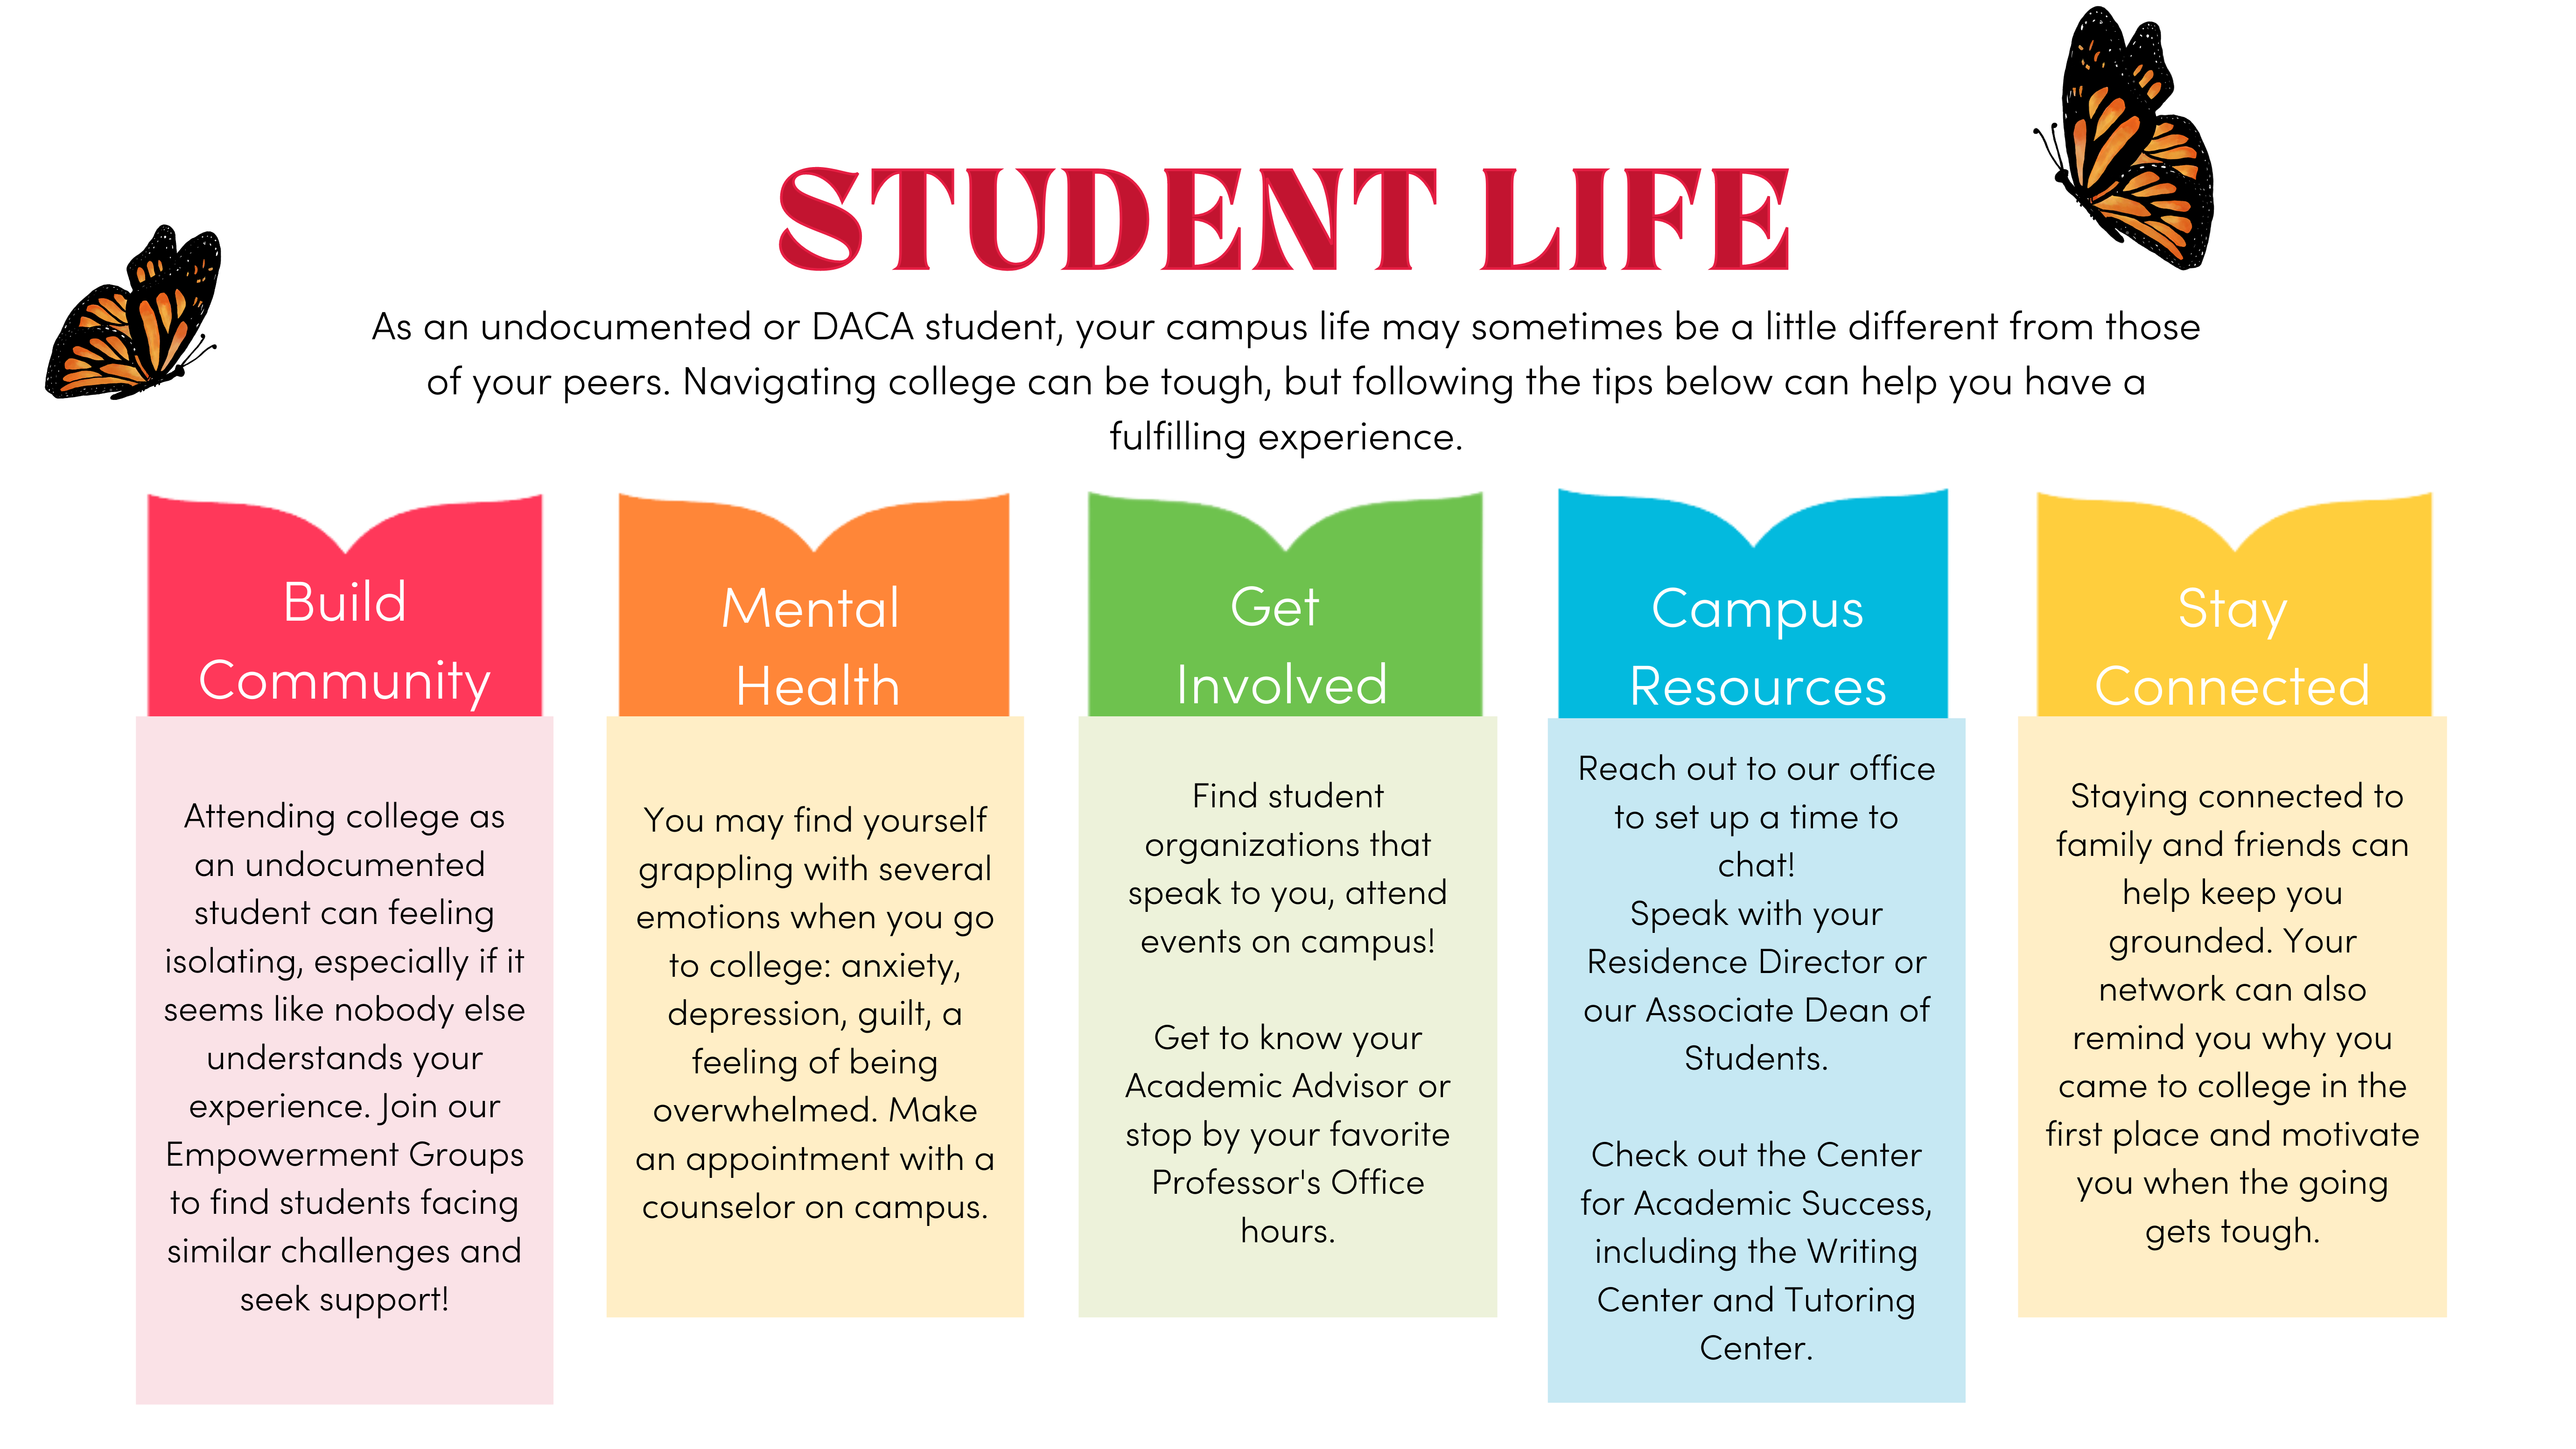 Infographic containing tips for undocumented students along 5 categories: Build Community, Mental Health, Get Involved, Campus Resources, Stay Connected